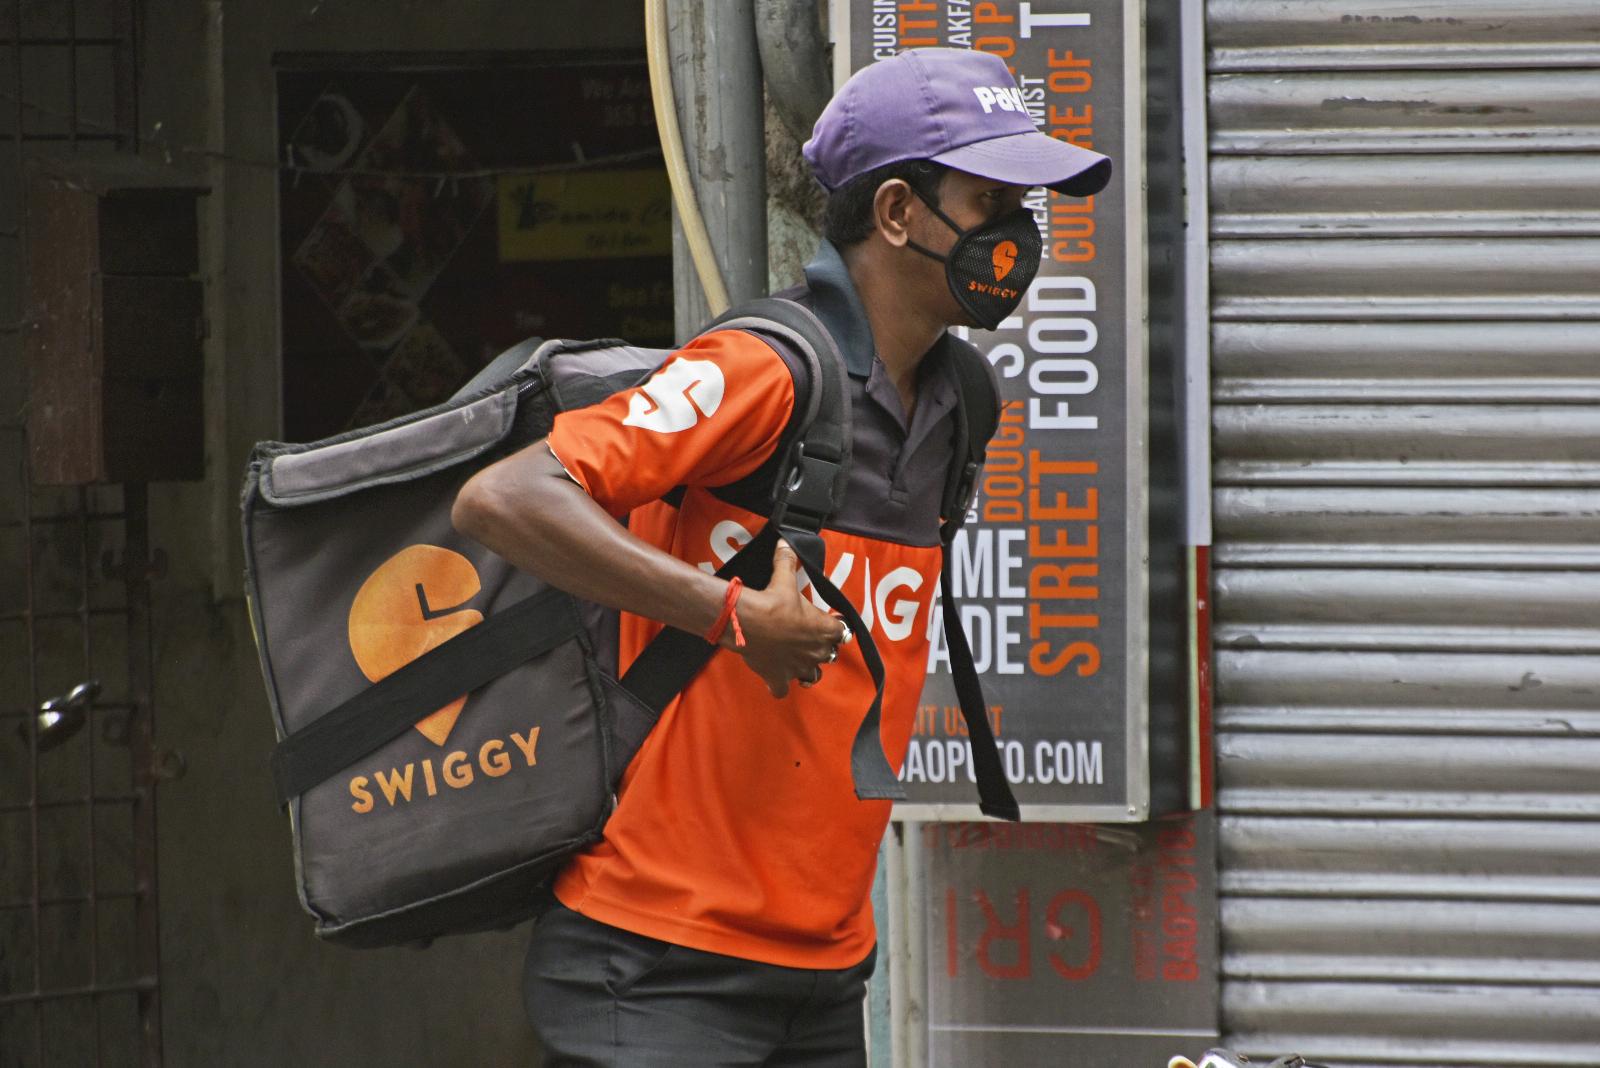 Indian food delivery giant Swiggy to cut 380 jobs